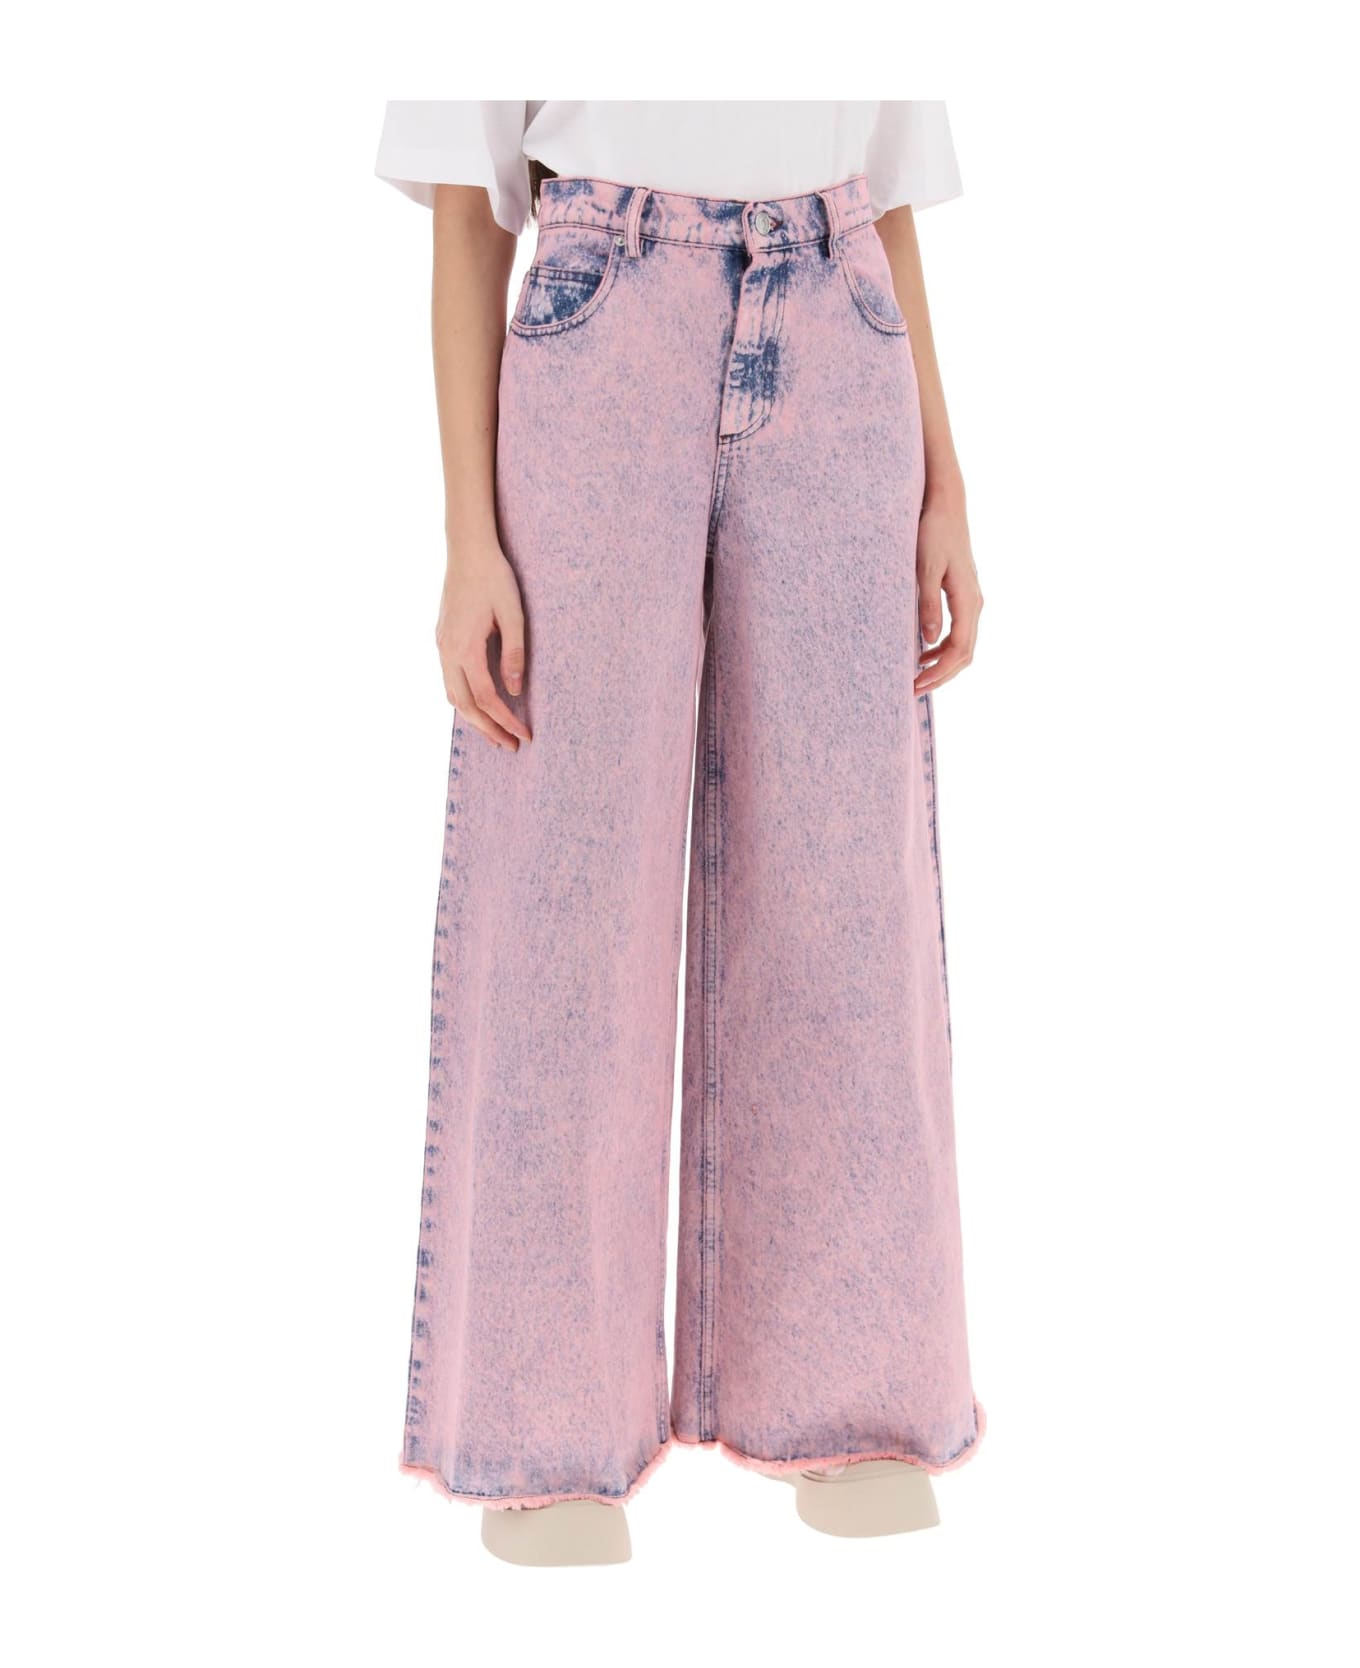 Marni Wide Leg Jeans In Overdyed Denim - Pink